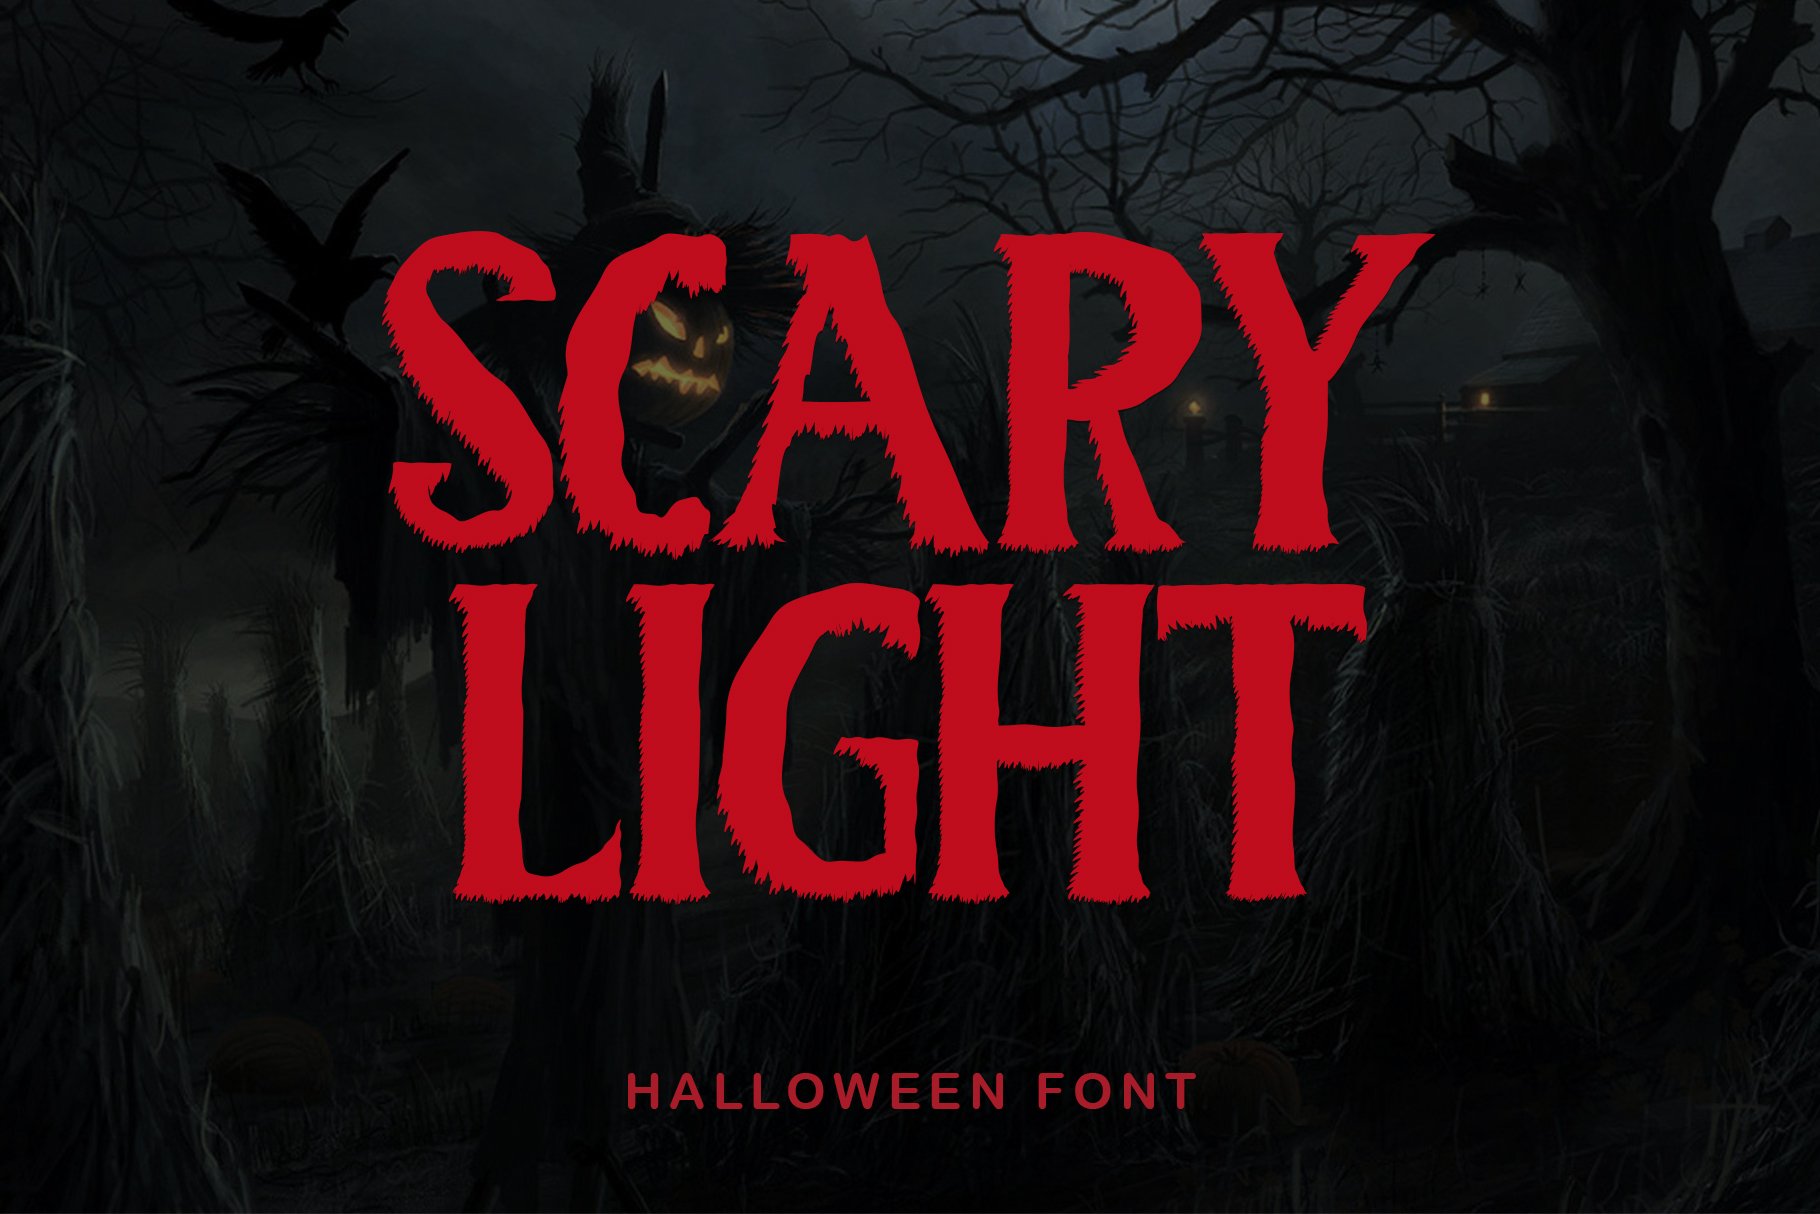 Scary Light cover image.